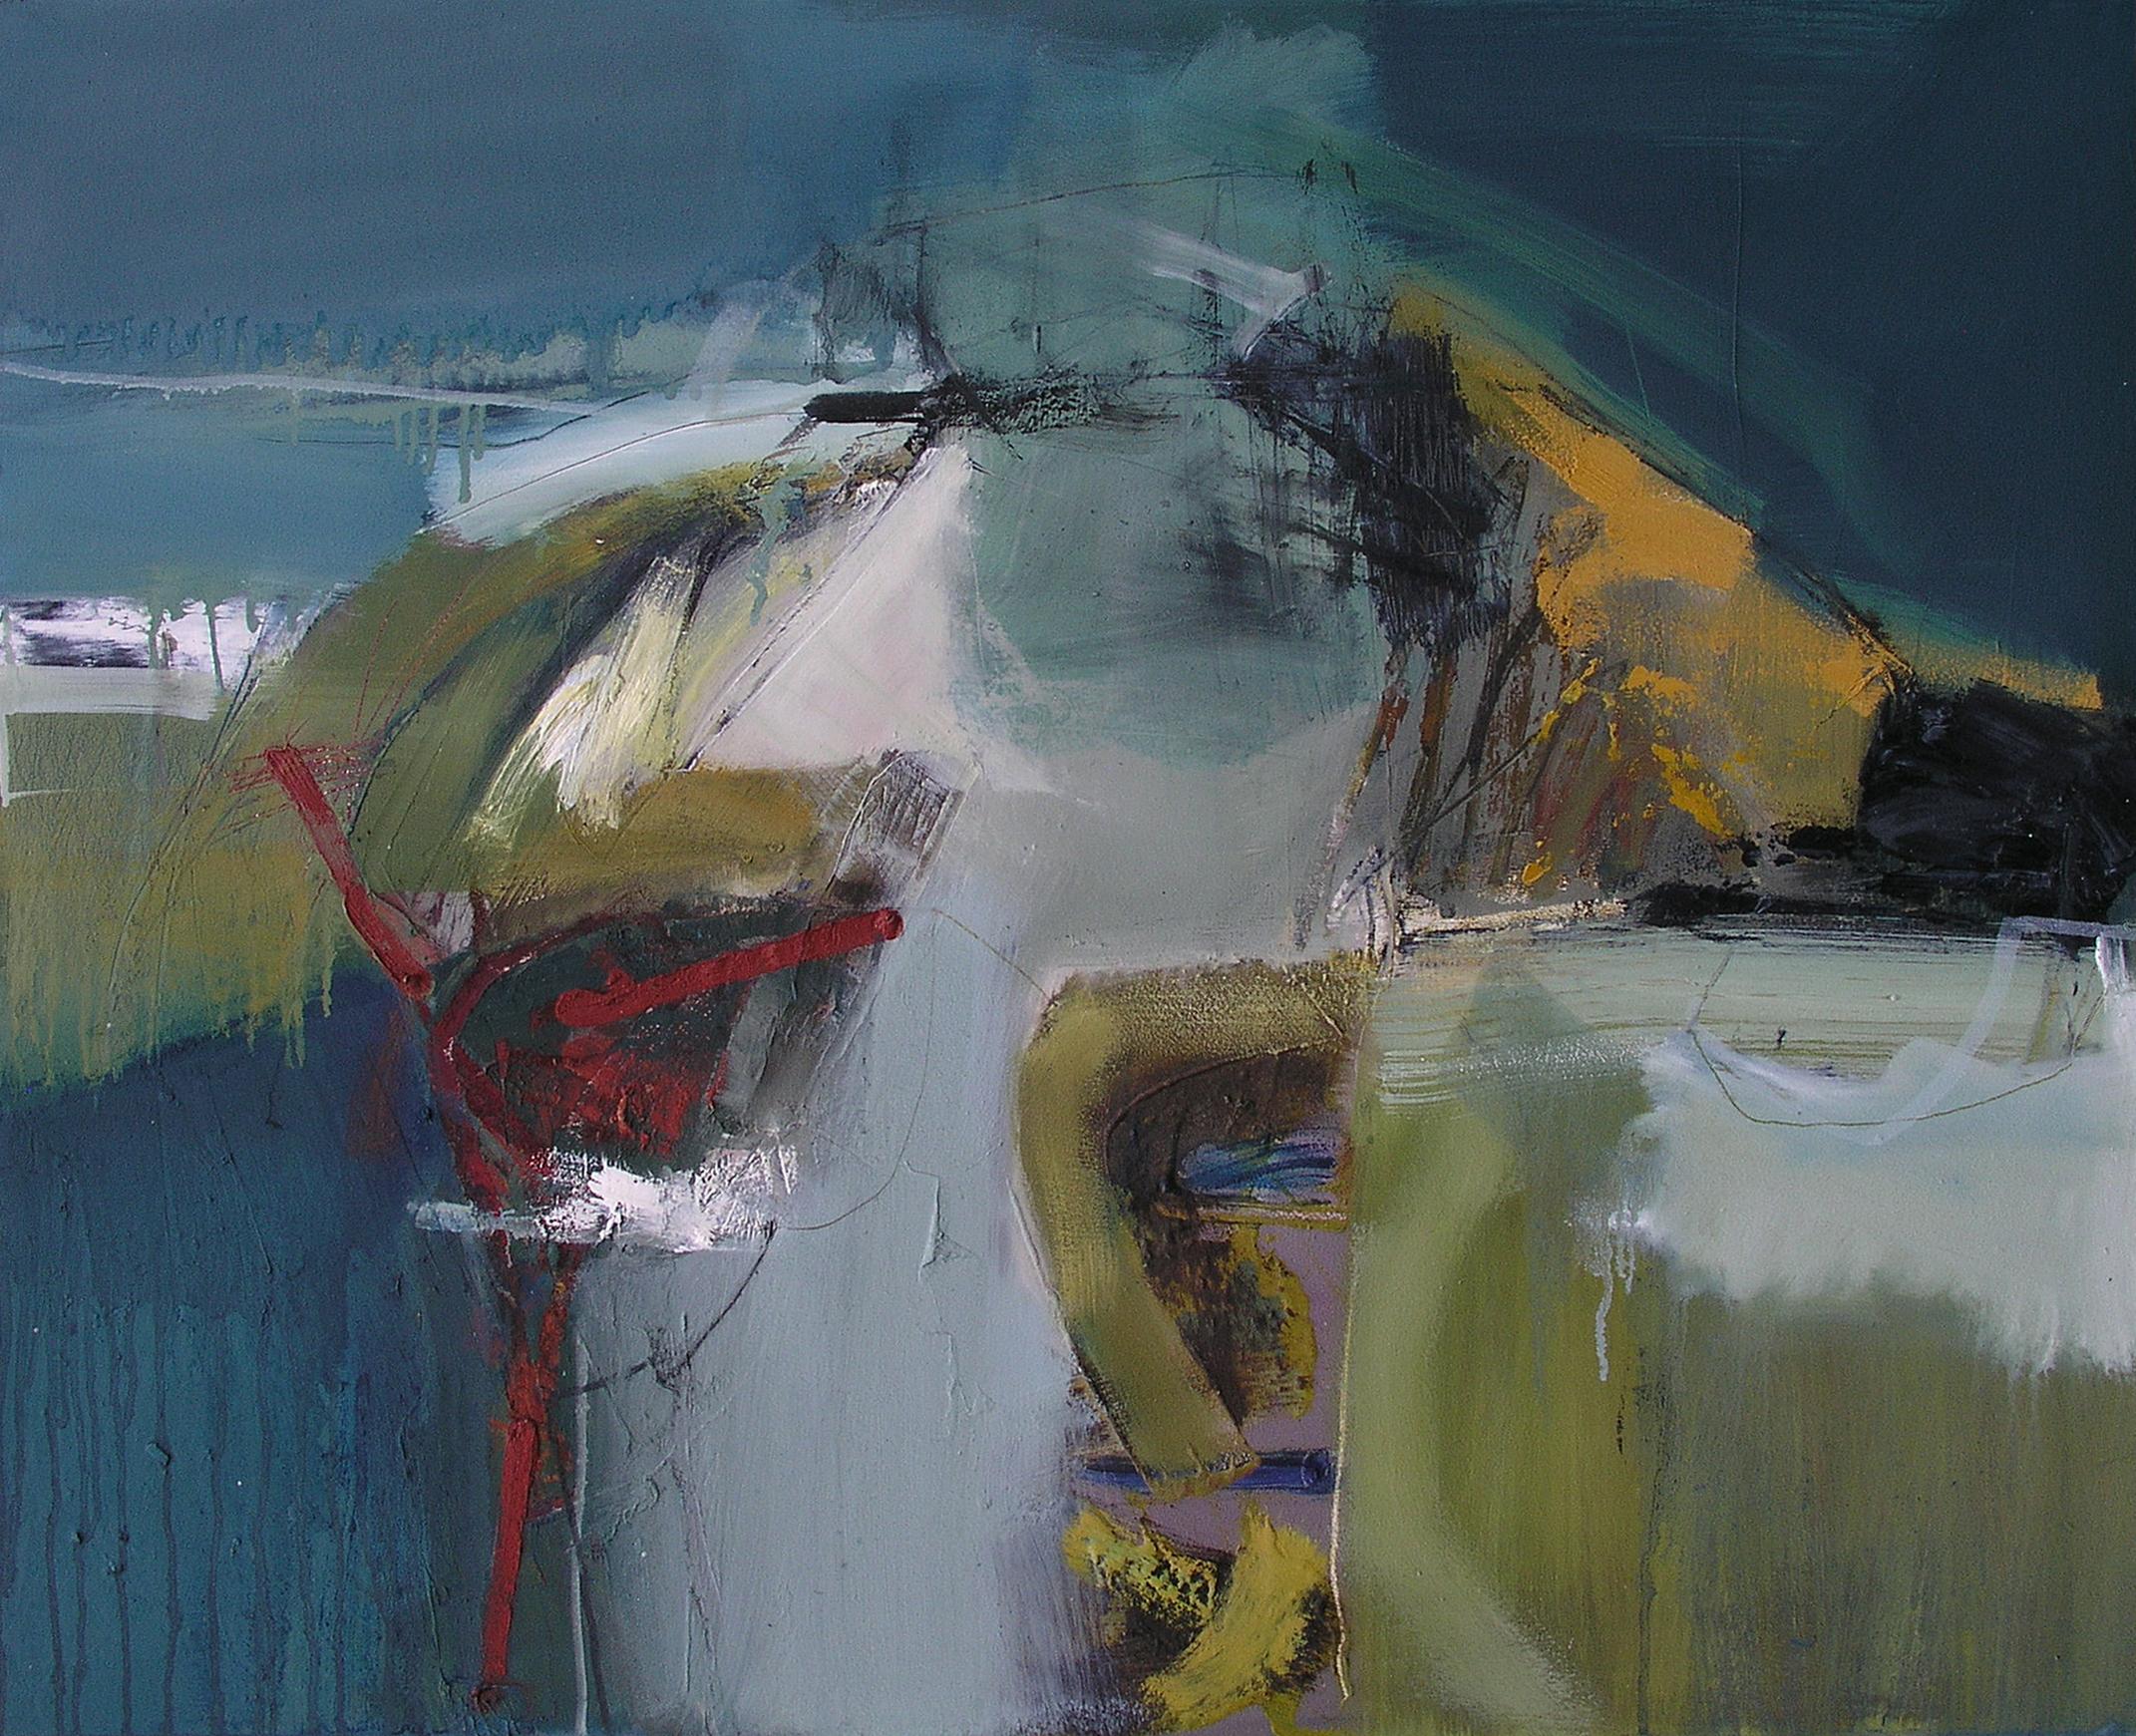 Arc Response: Gestural Abstract Landscape Painting with Blue, Green and Red